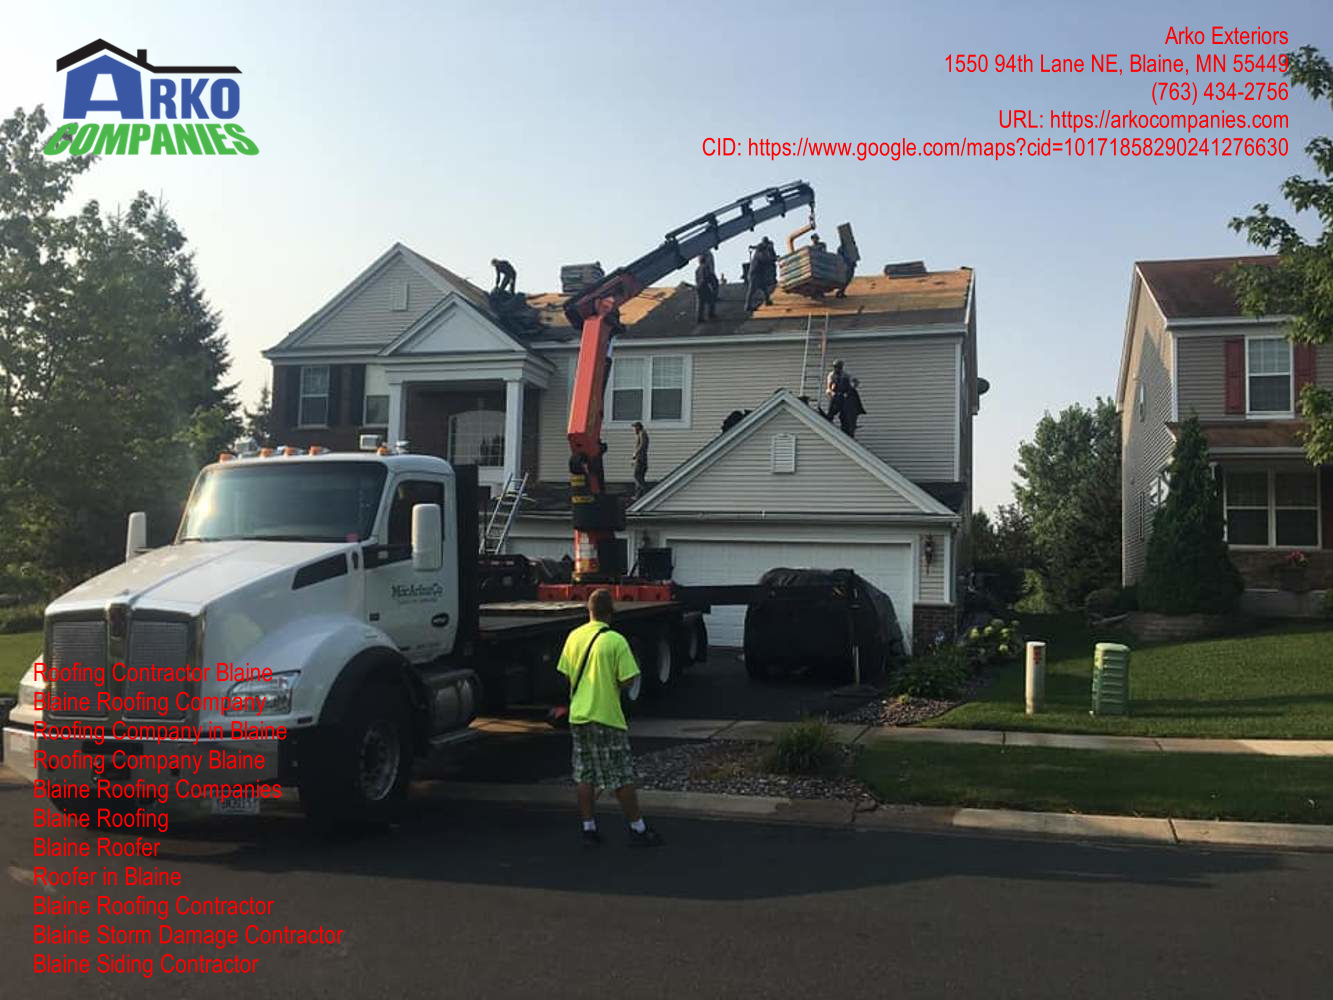 Choosing an Amazing Roofing Contractor in Blaine, MN